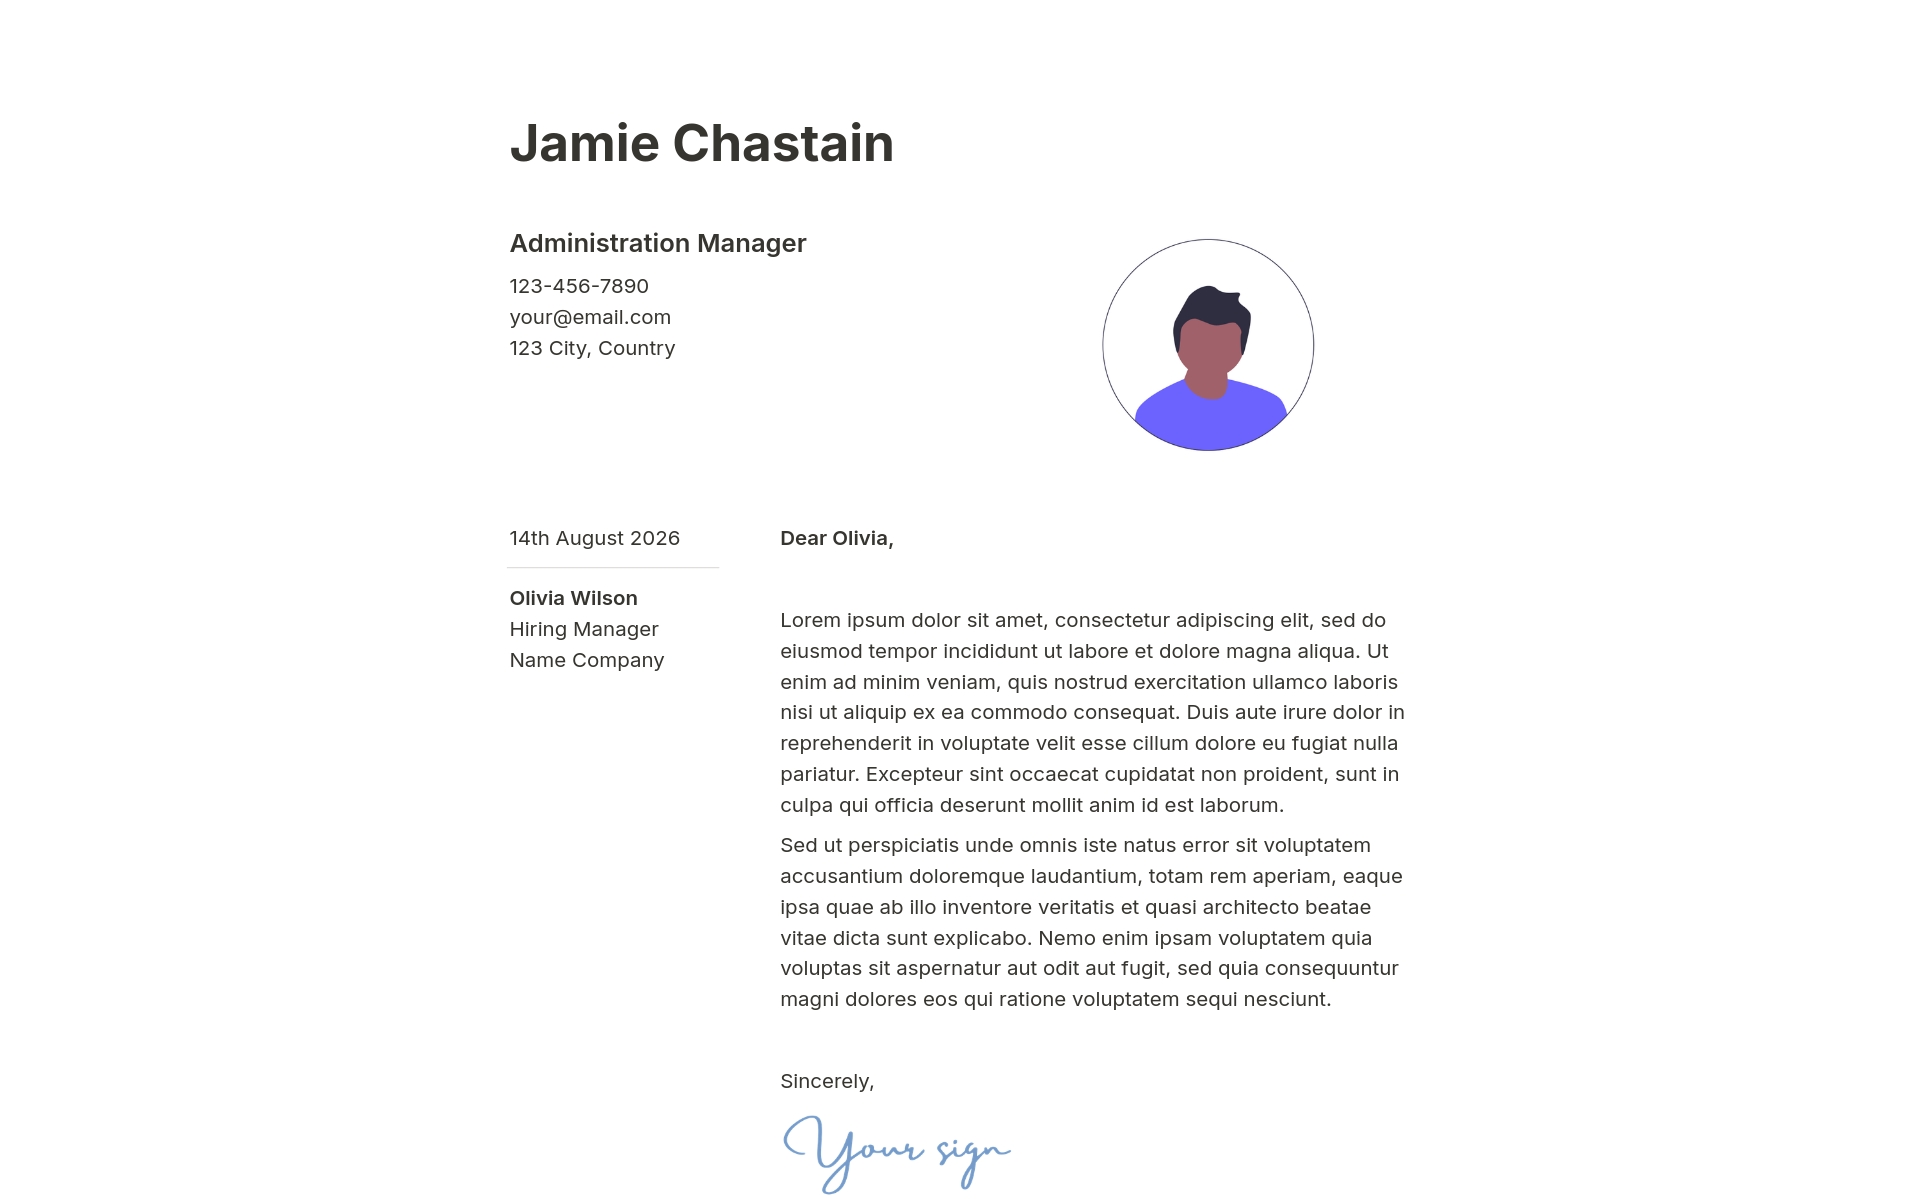 Application Job Letter templates, You can confidently present yourself as the ideal candidate for any position. 